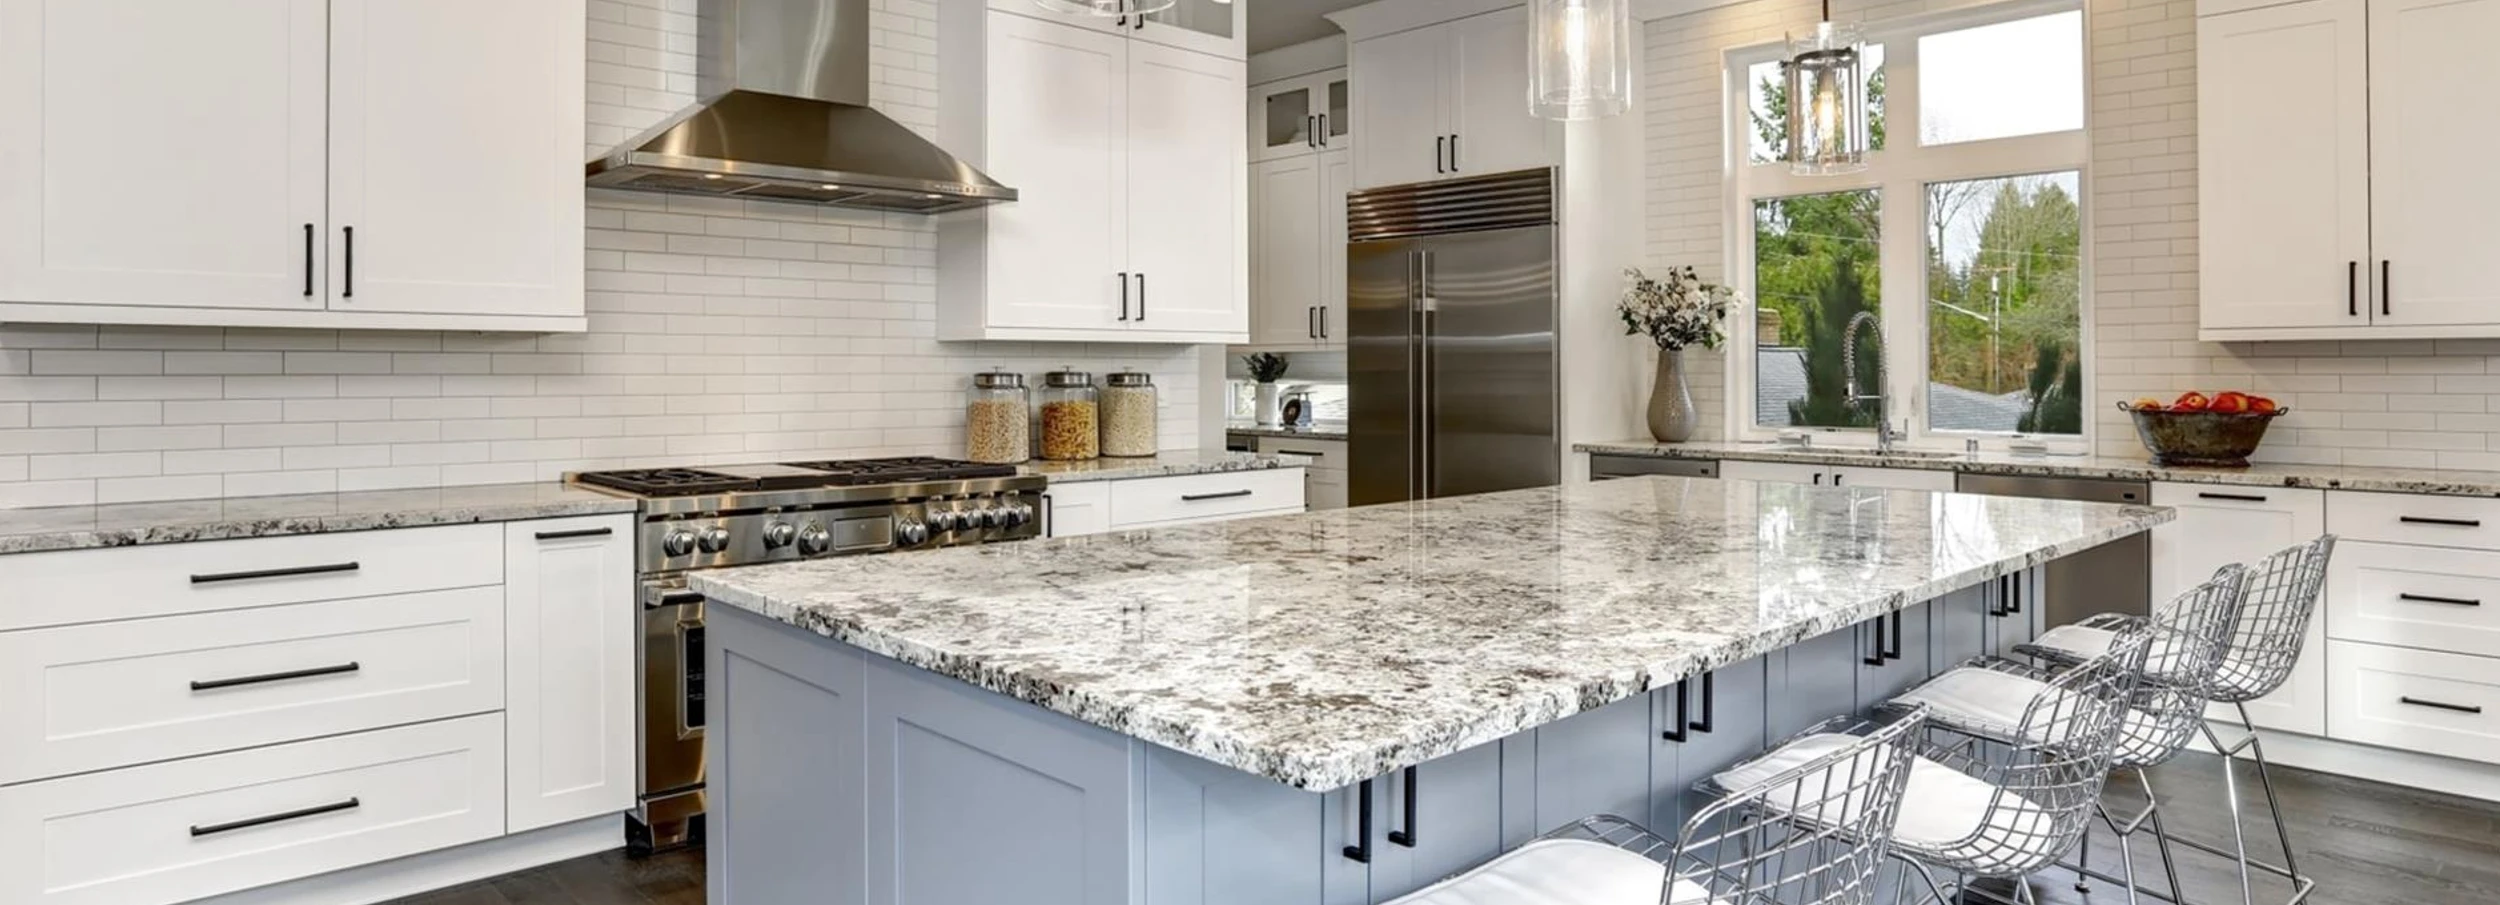 Gray marble top kitchen island in center of large, bright modern kitchen with white cabinets.